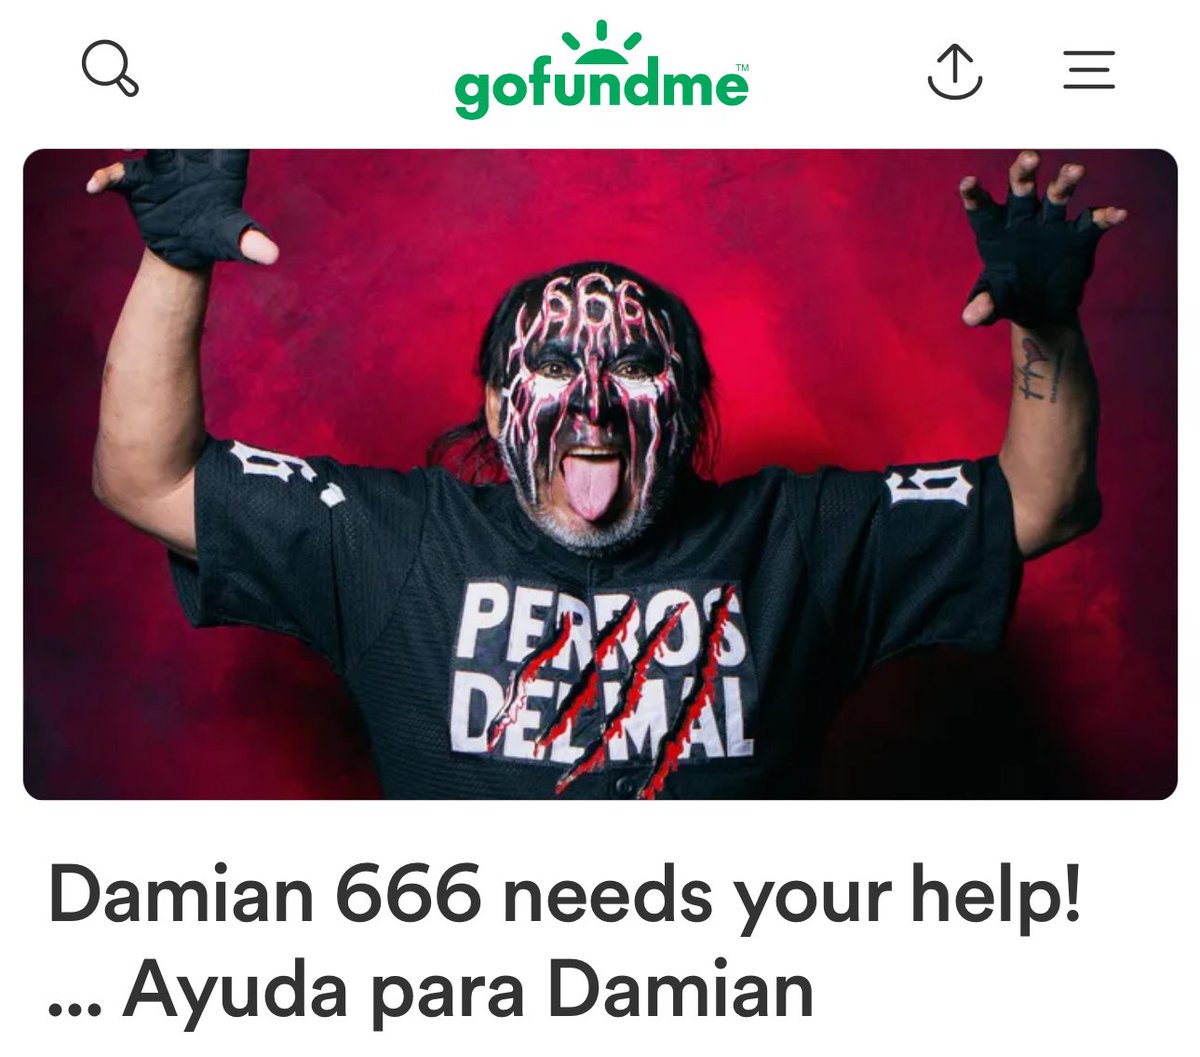 🙏🏻 If you can, please consider donating. Damian 666 needs our help 🙏🏻 gofund.me/2f17cb7a @Bestia666tj